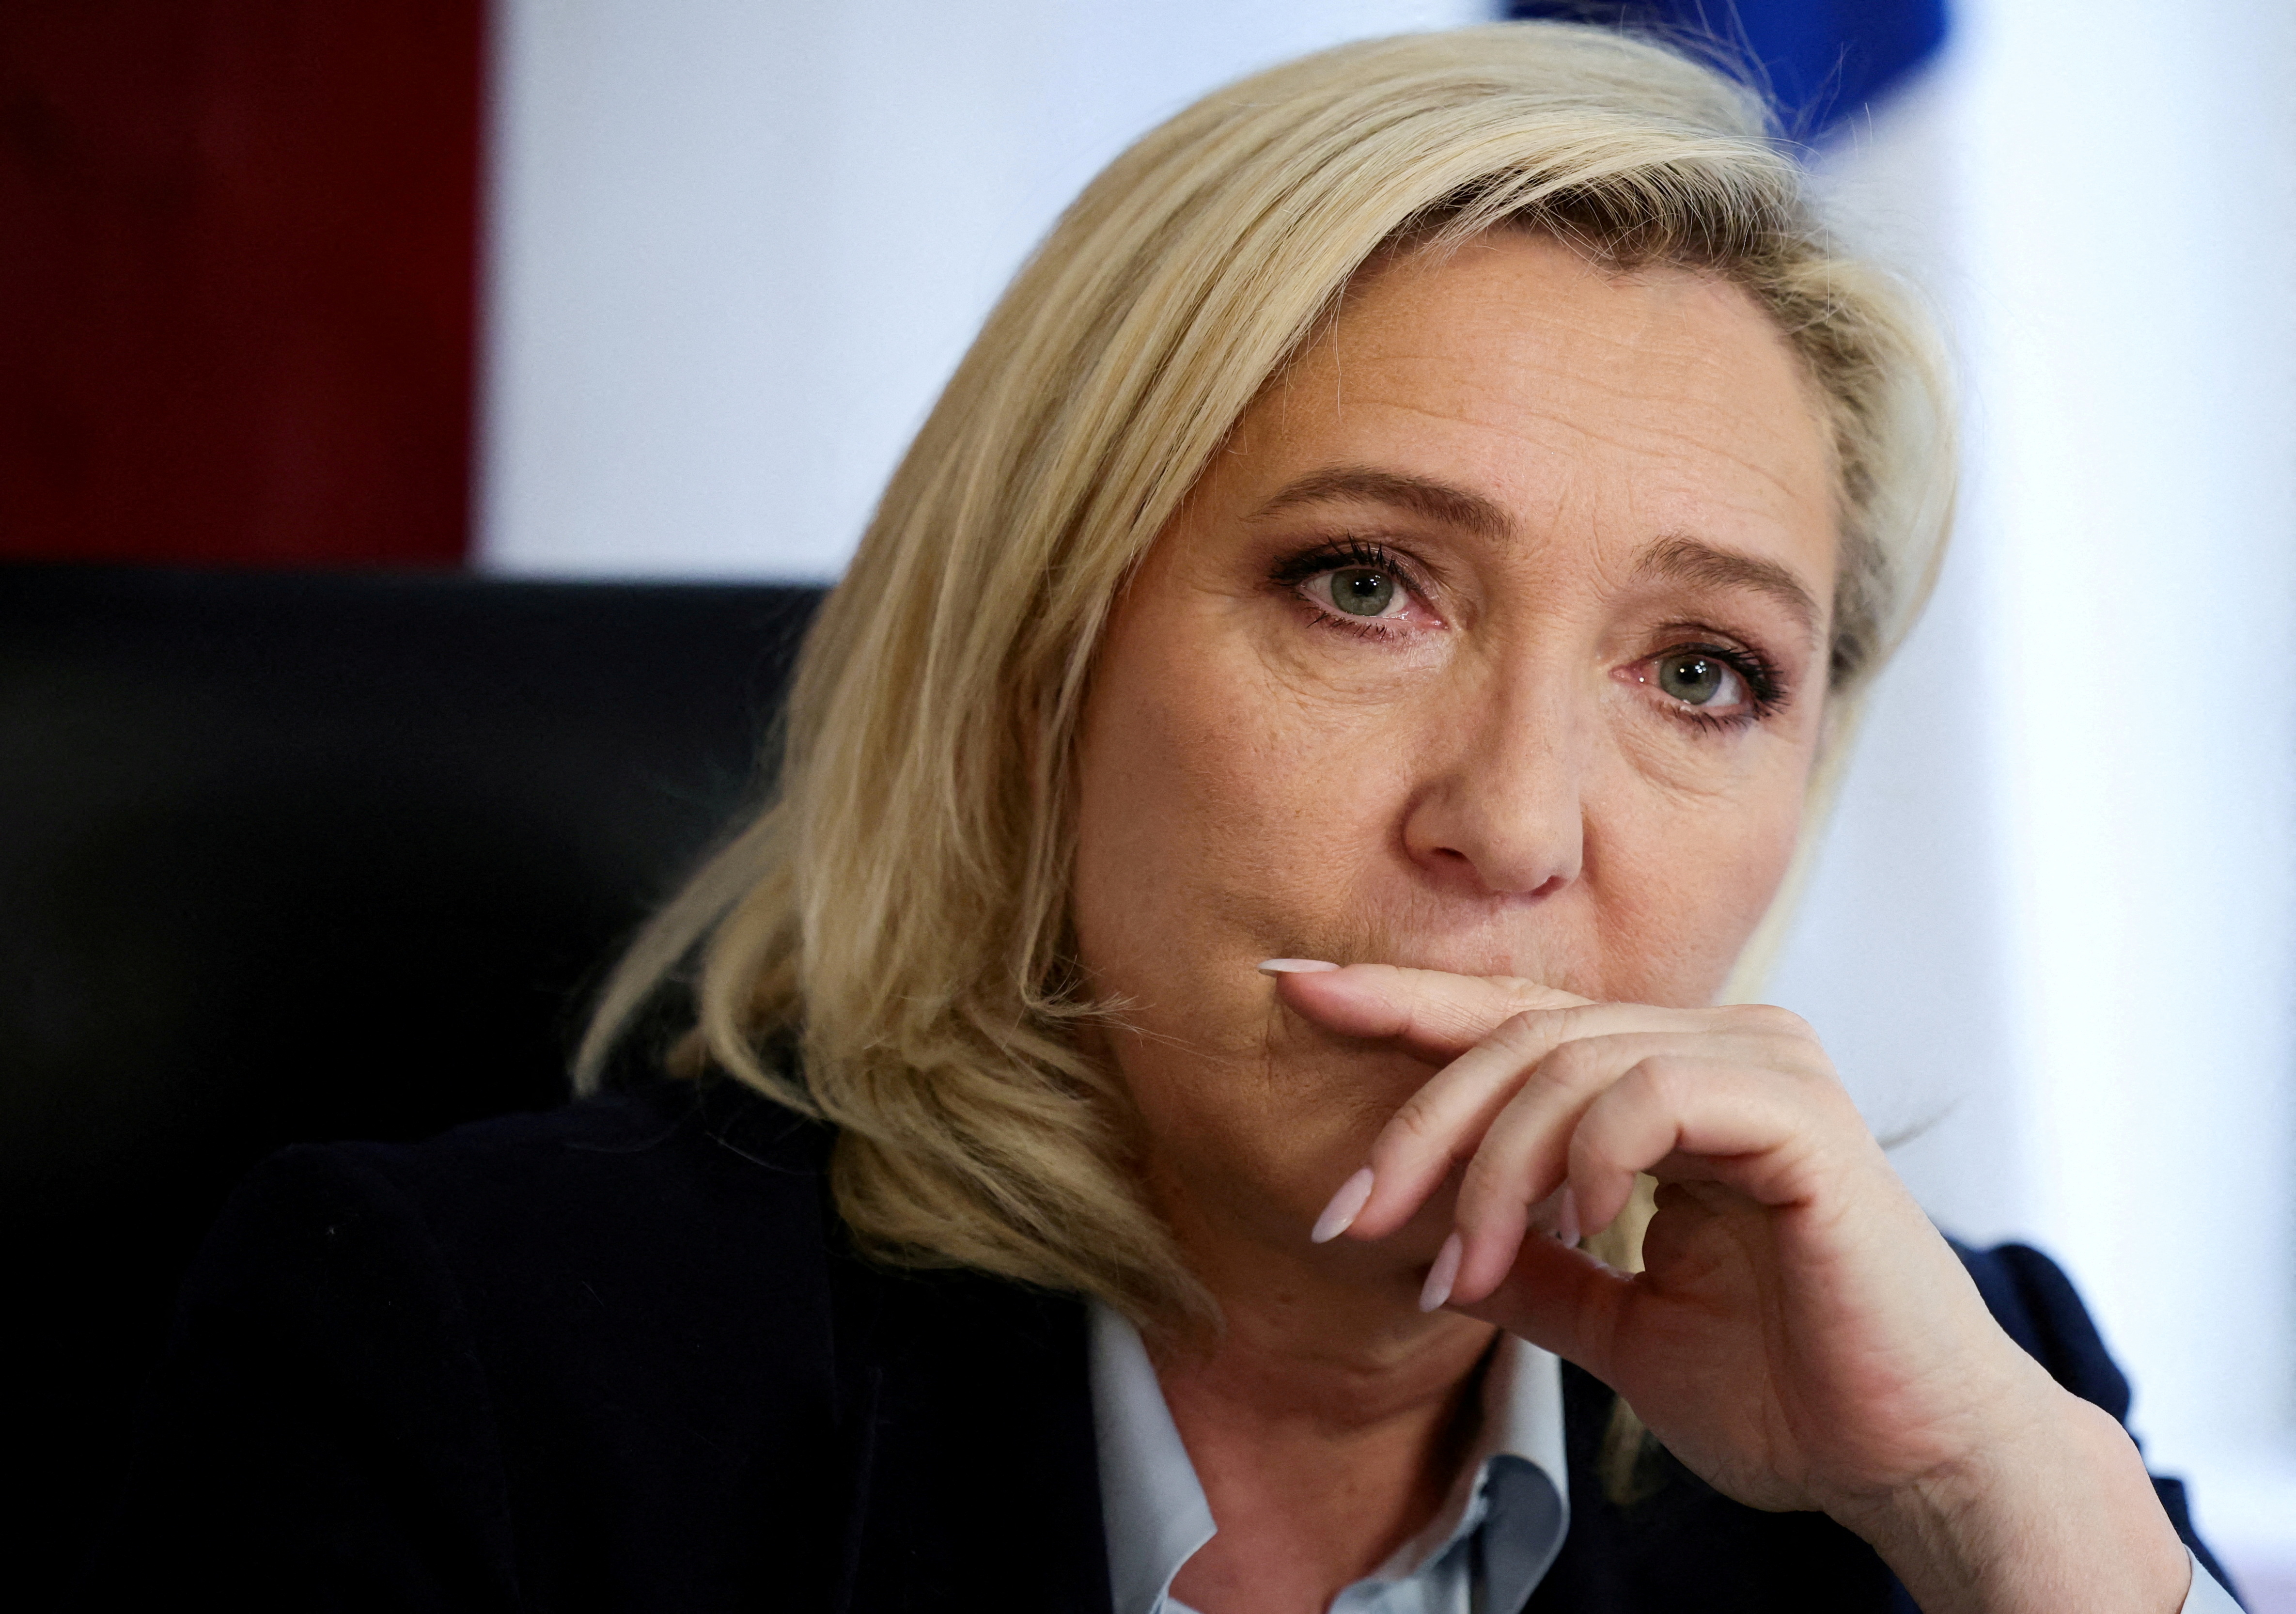 Interview with Marine Le Pen, French far-right presidential candidate, in Paris